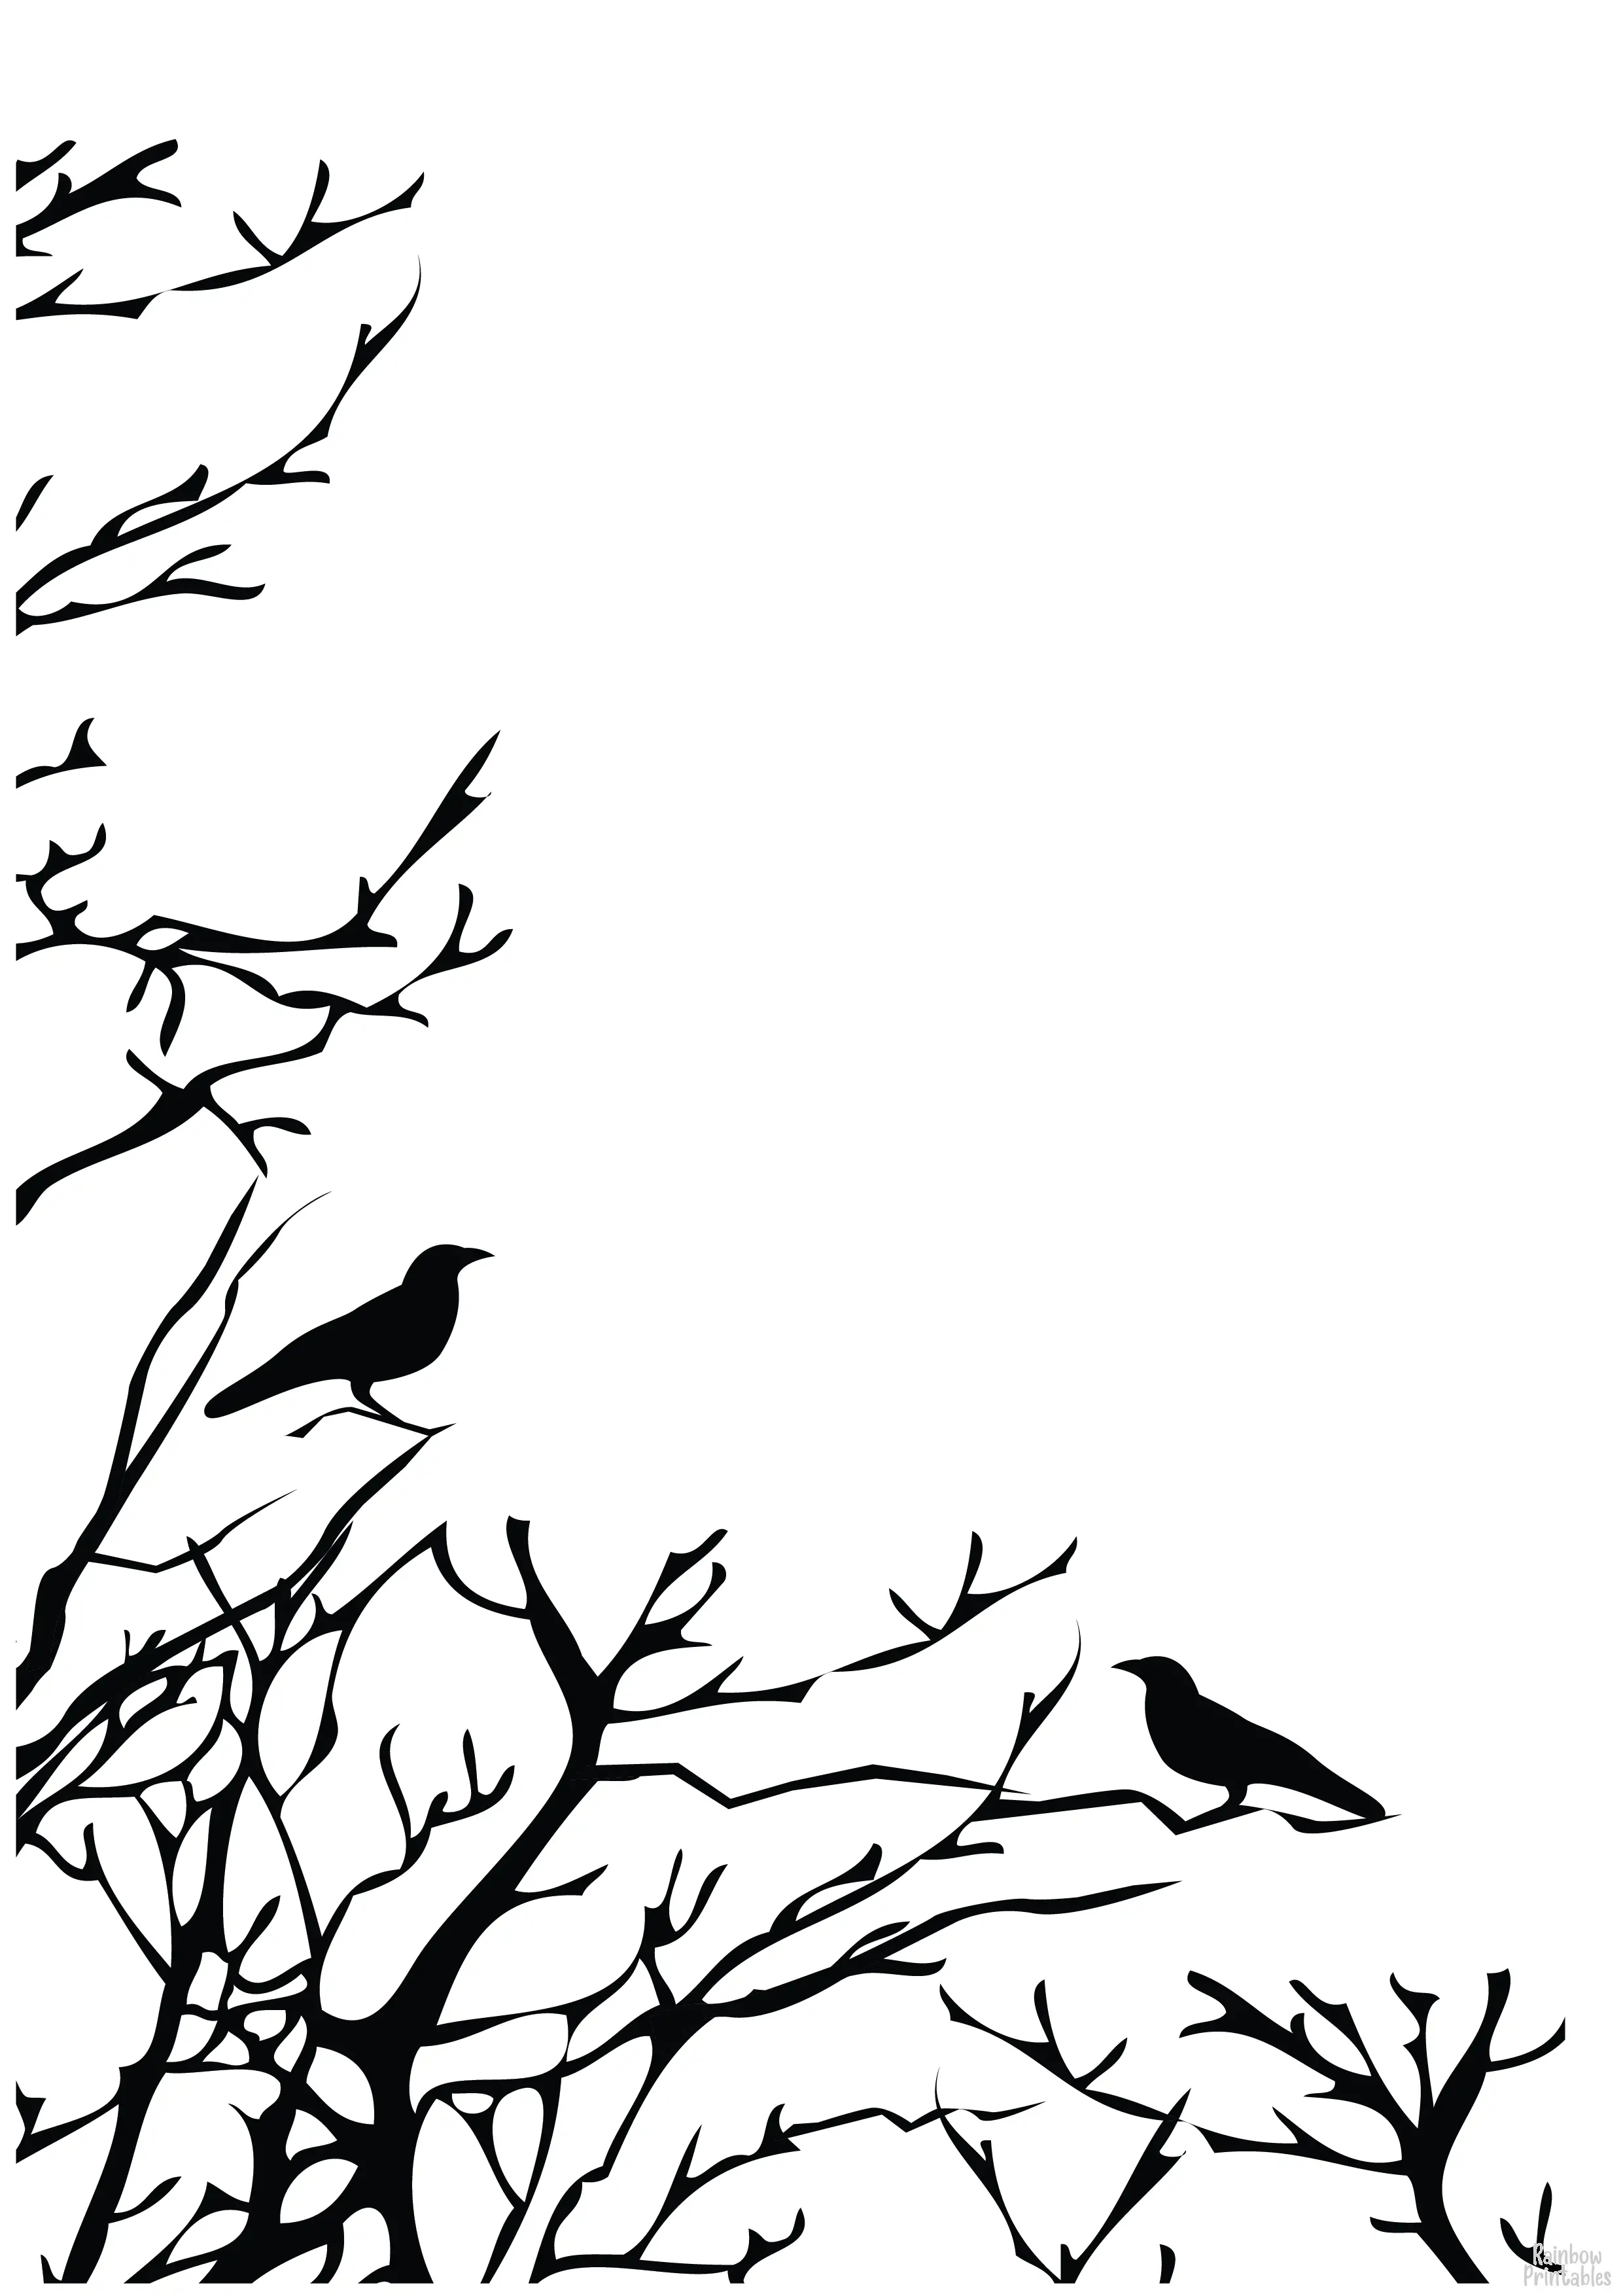 HALLOWEEN TREE TOPS BIRDS SPOOKY Line Art Drawing Set Free Activity Coloring Pages for Kids